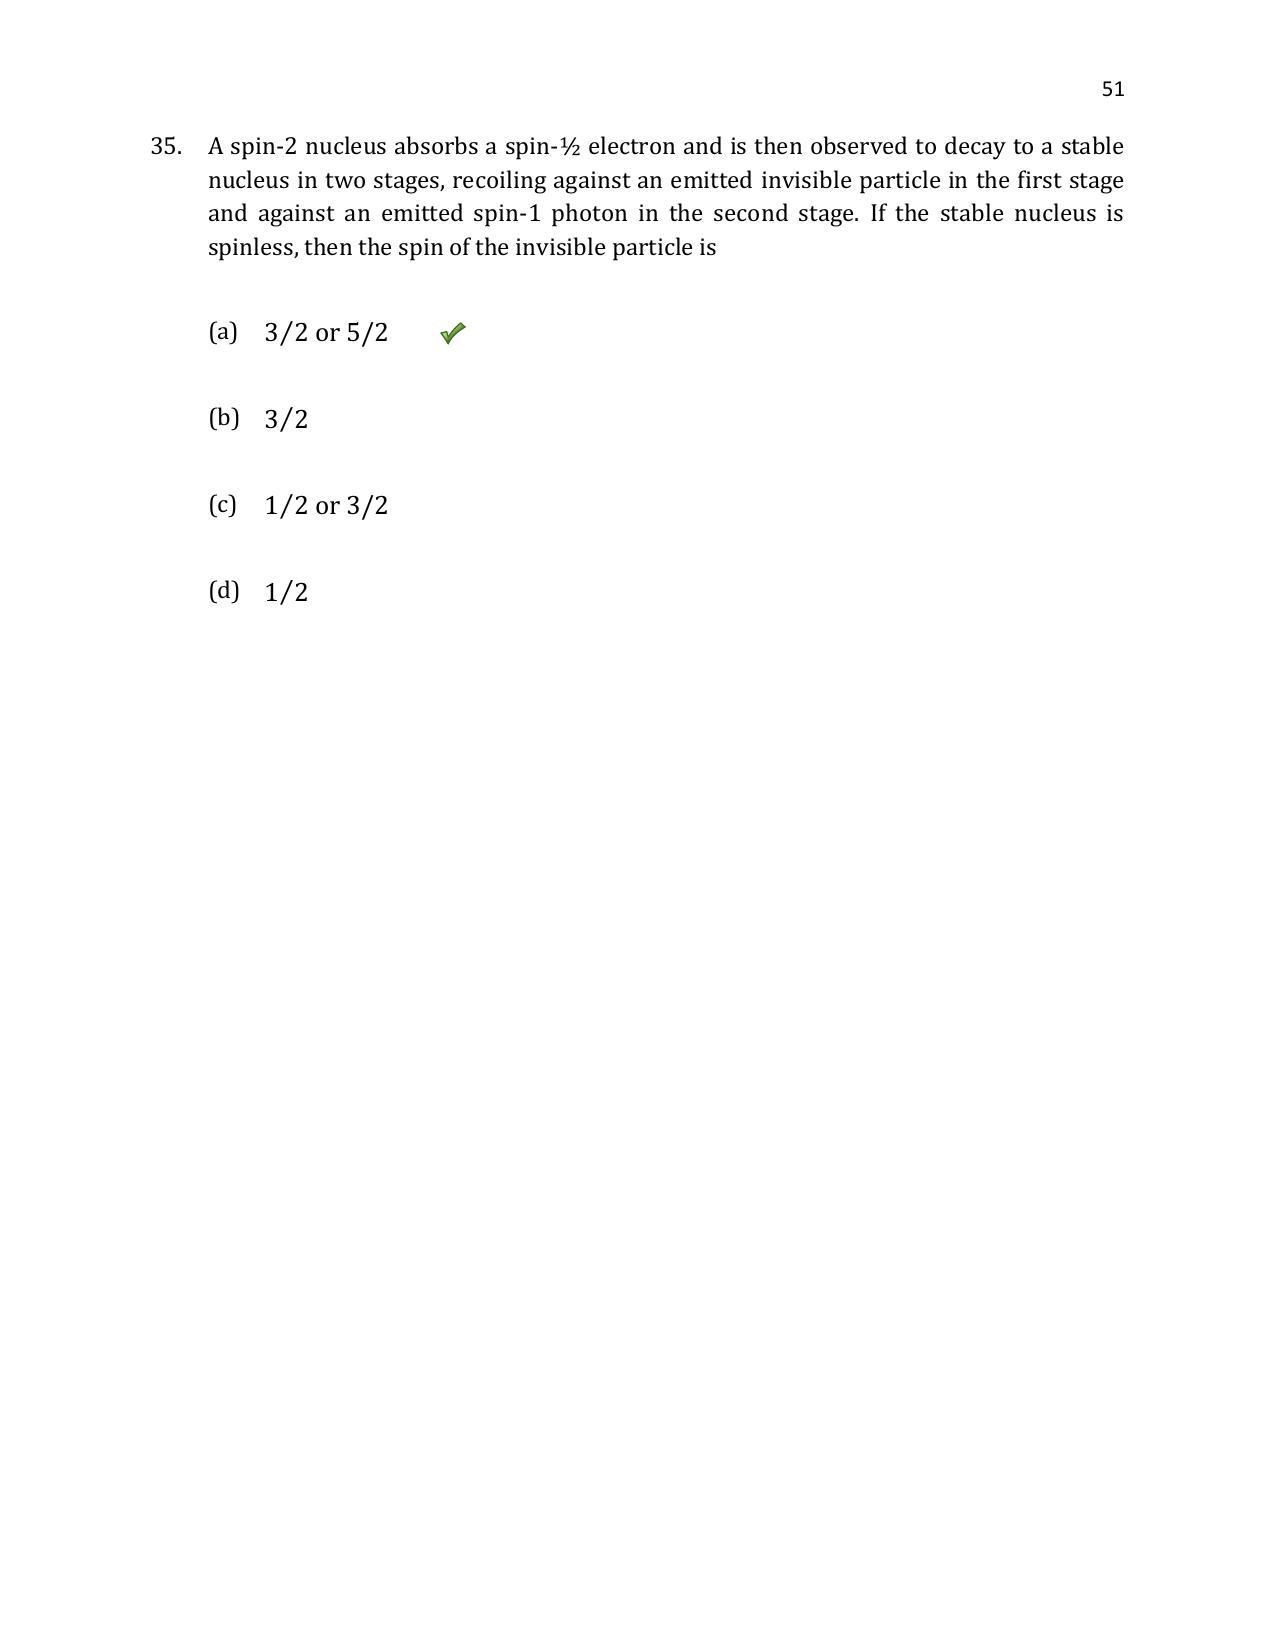 TIFR GS 2020 Physics Question Paper - Page 52